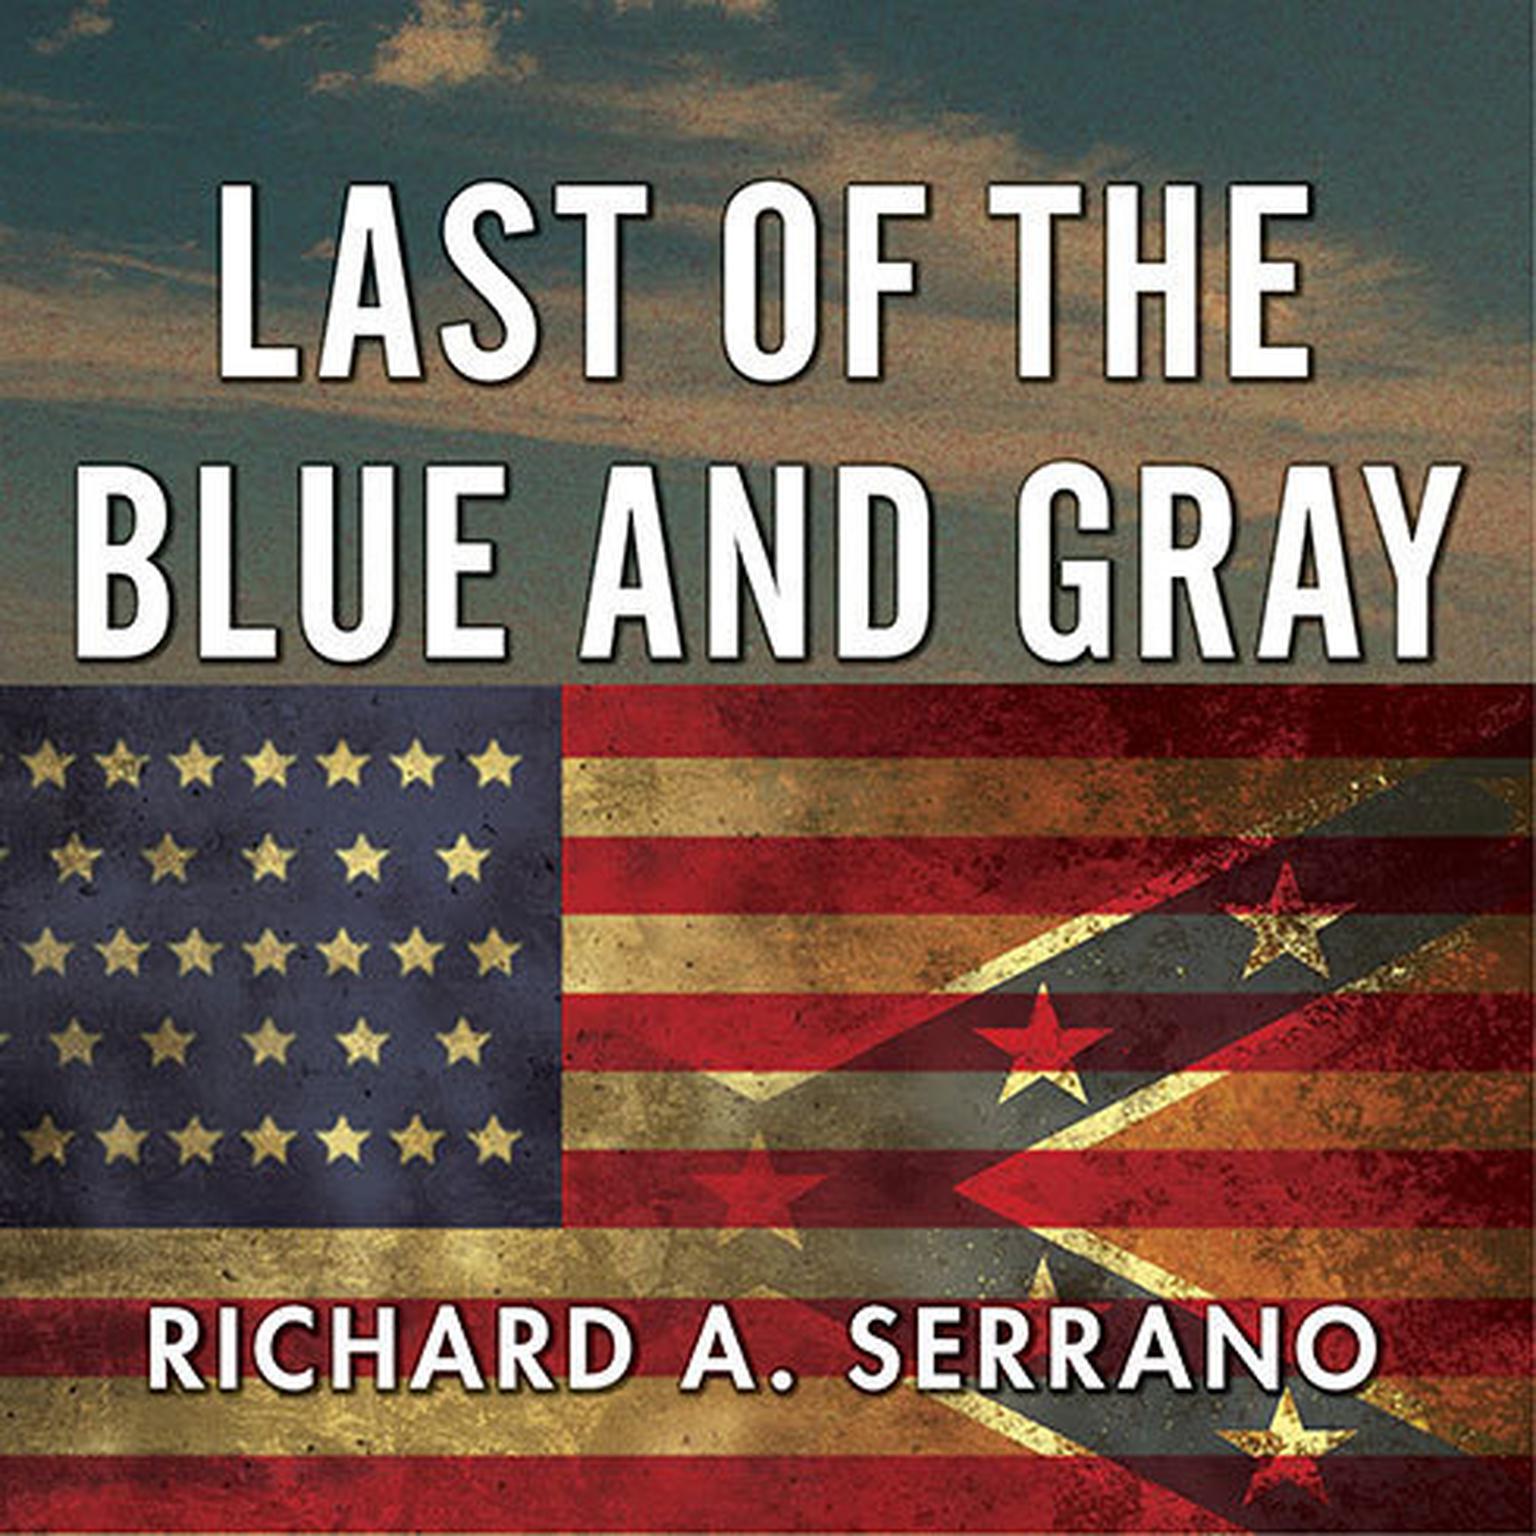 Last of the Blue and Gray: Old Men, Stolen Glory, and the Mystery That Outlived the Civil War Audiobook, by Richard A. Serrano